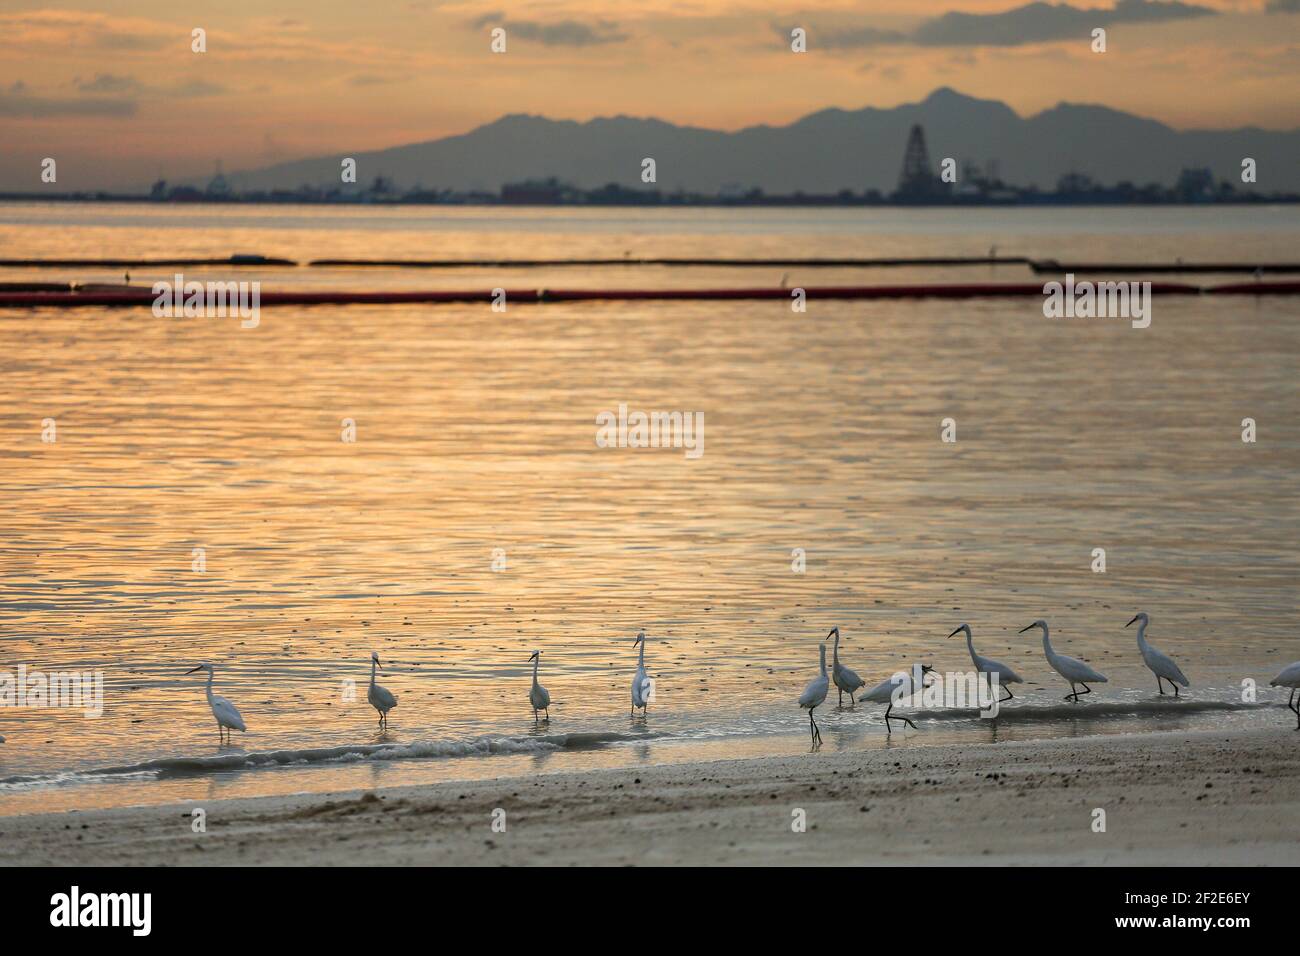 A flock of birds relax on the shore as people visit a portion of the Manila baywalk area that was covered with crushed dolomite rocks amid rising coronavirus cases in Manila, Philippines. Stock Photo